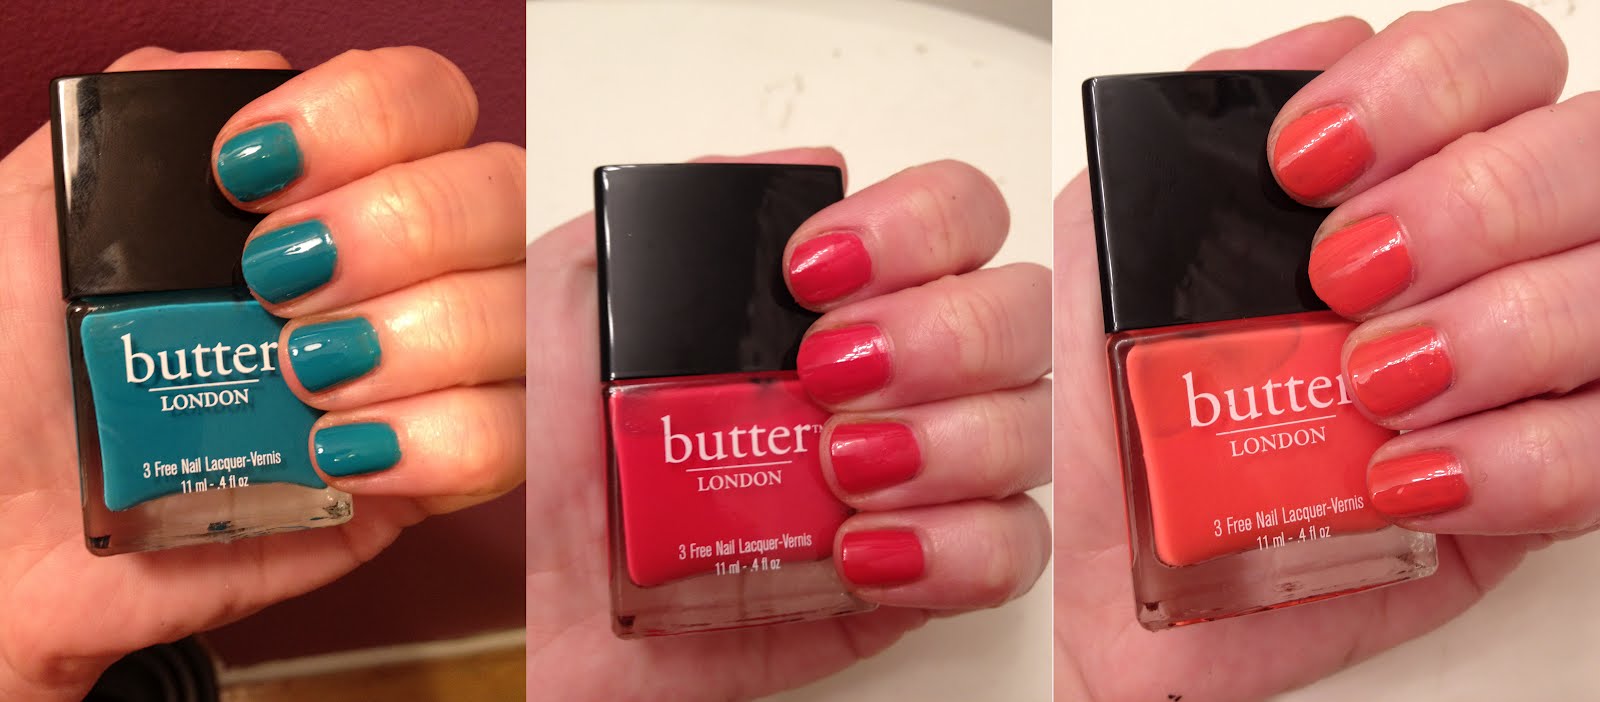 Butter London Nail Lacquer in Teddy Girl - wide 4